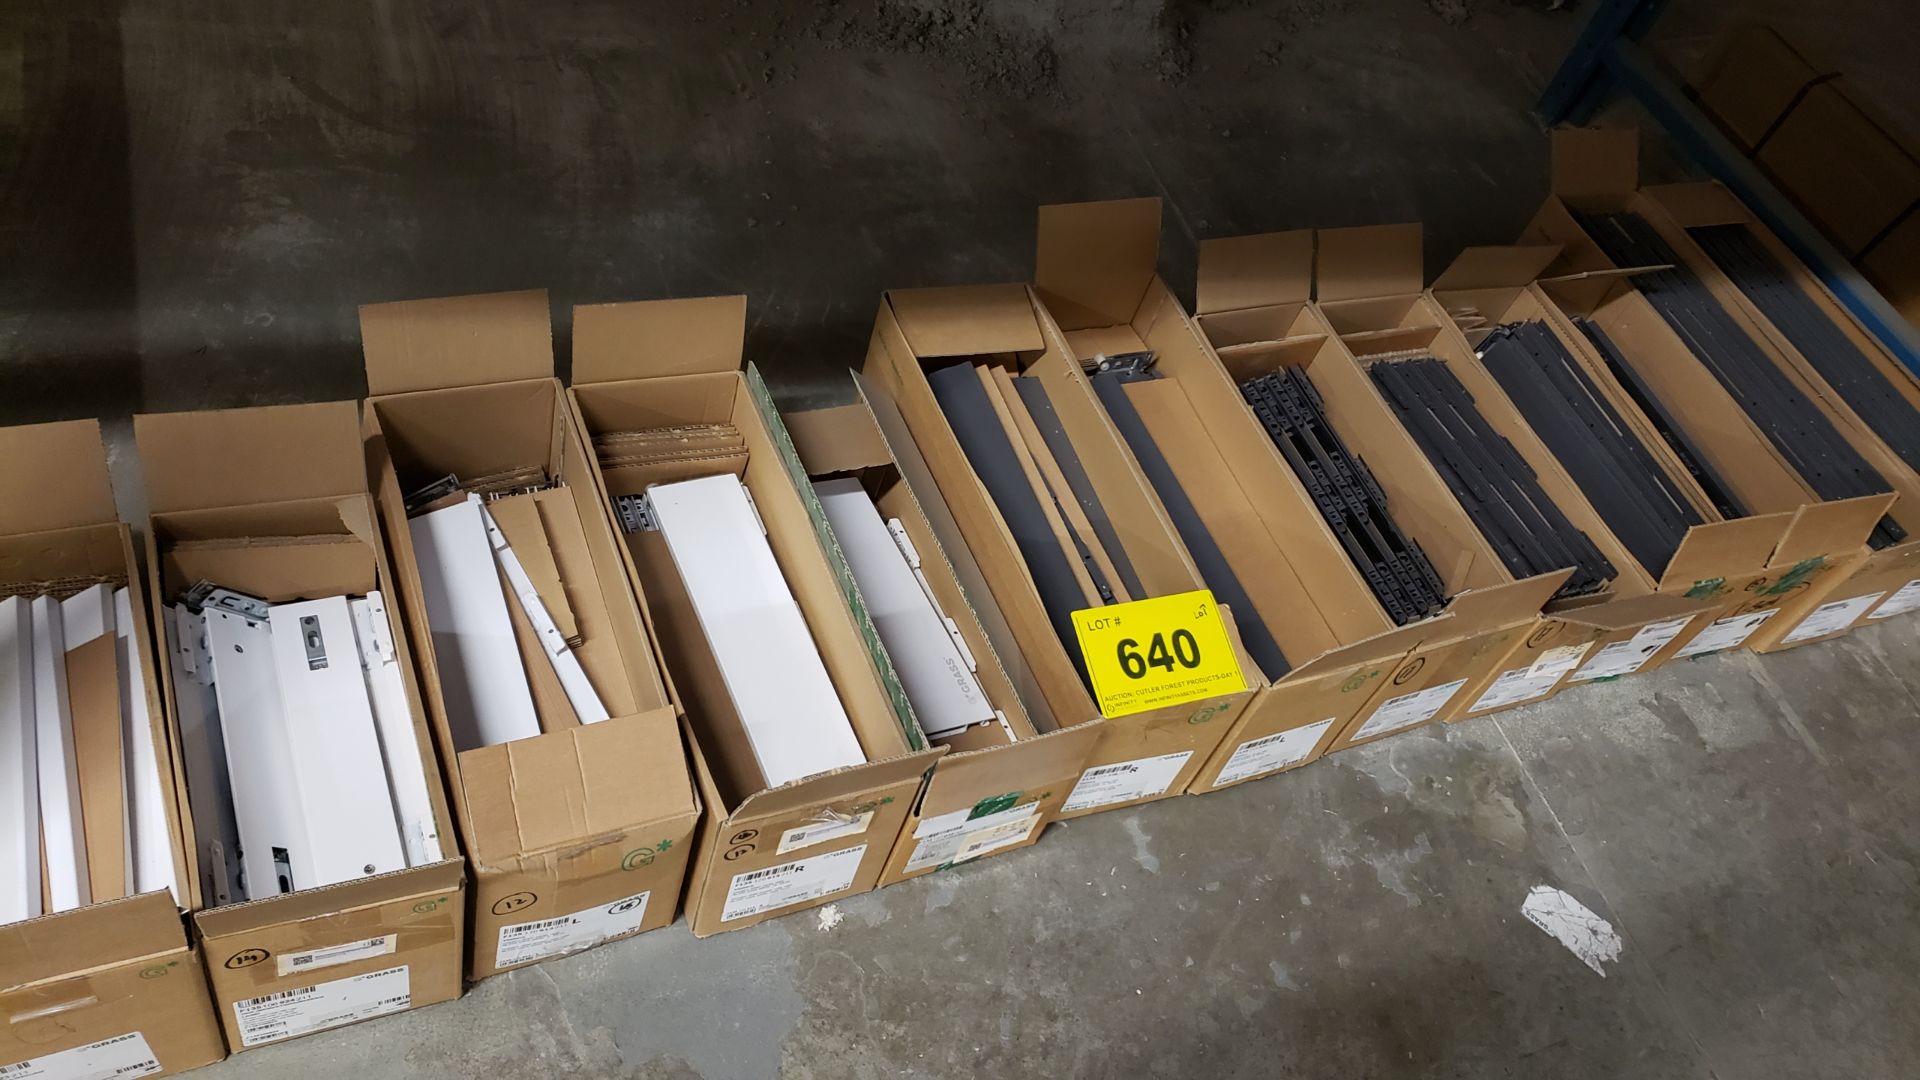 LOT BOXES OF GRASS VIONARO STEEL DRAWER SIDE H89 NL450, GRAPHITE, RIGHT AND LEFT PU20, 12 BOXES OF